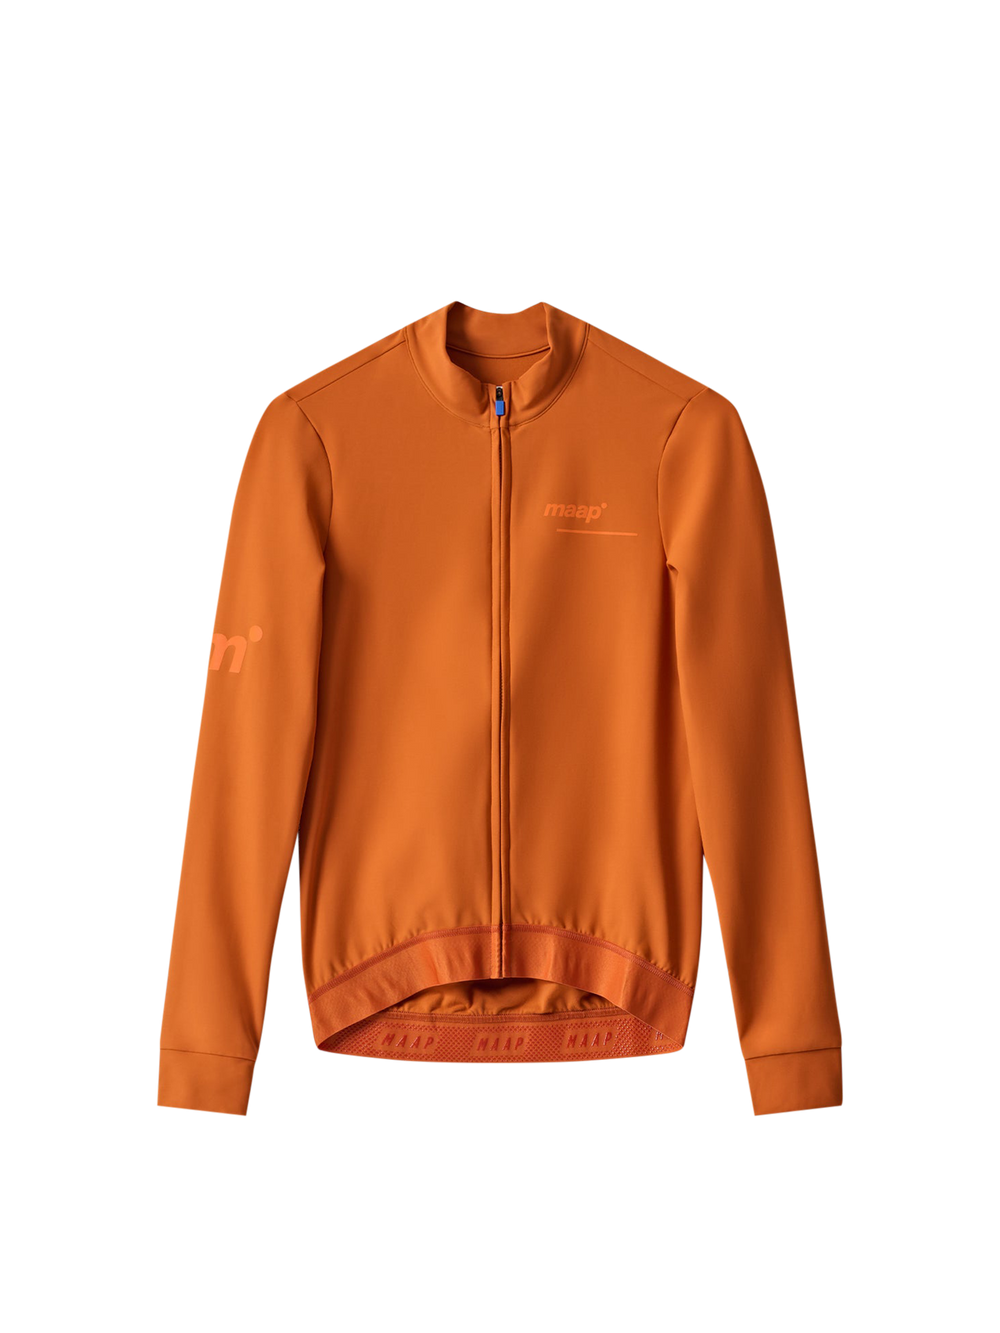 Product Image for Women's Training Thermal LS Jersey